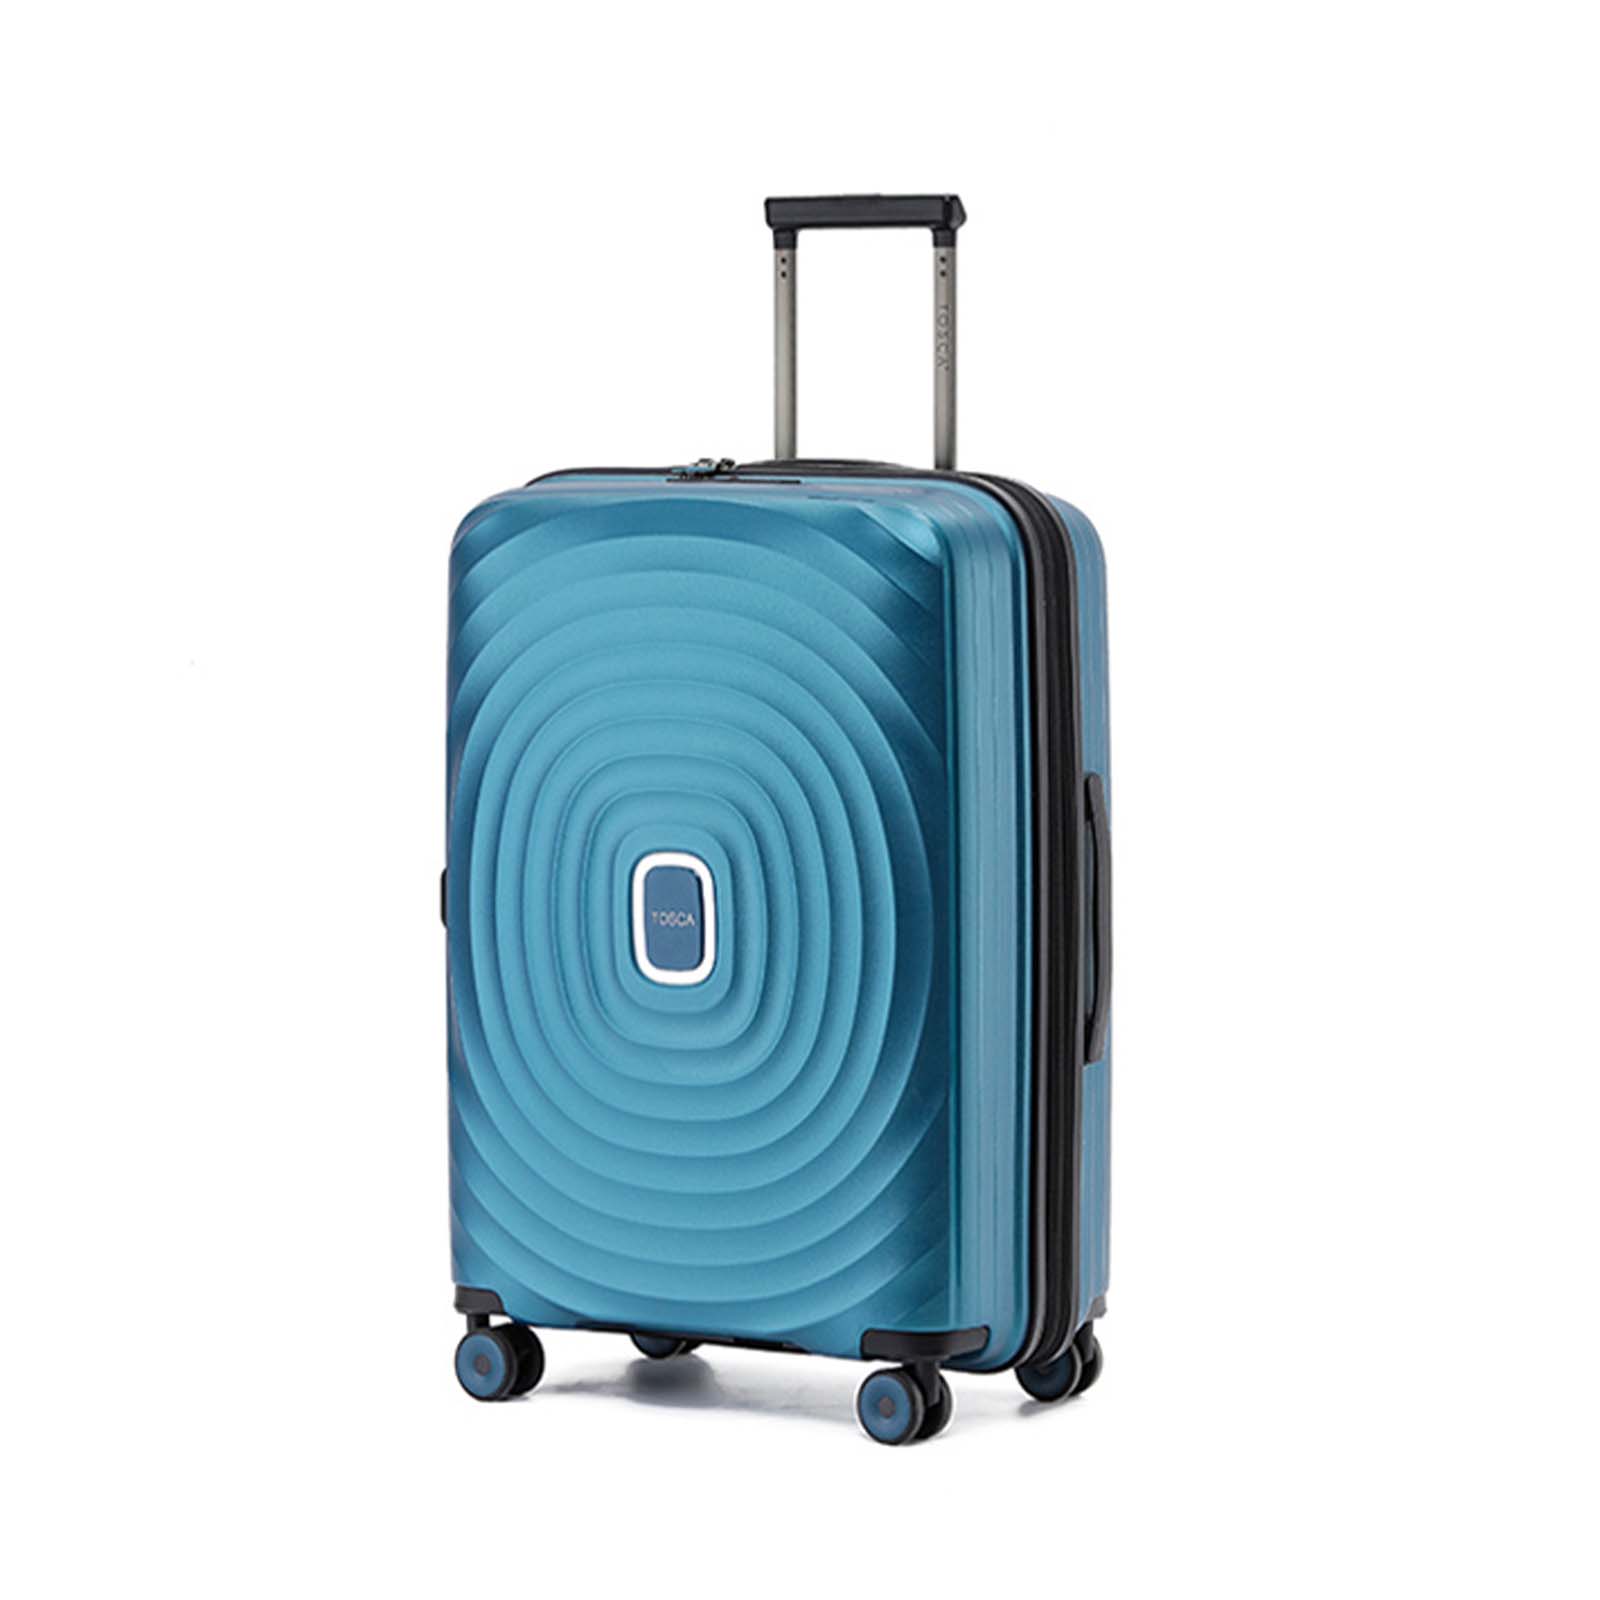 tosca-eclipse-4-wheel-67cm-carry-on-suitcase-blue-front-angle